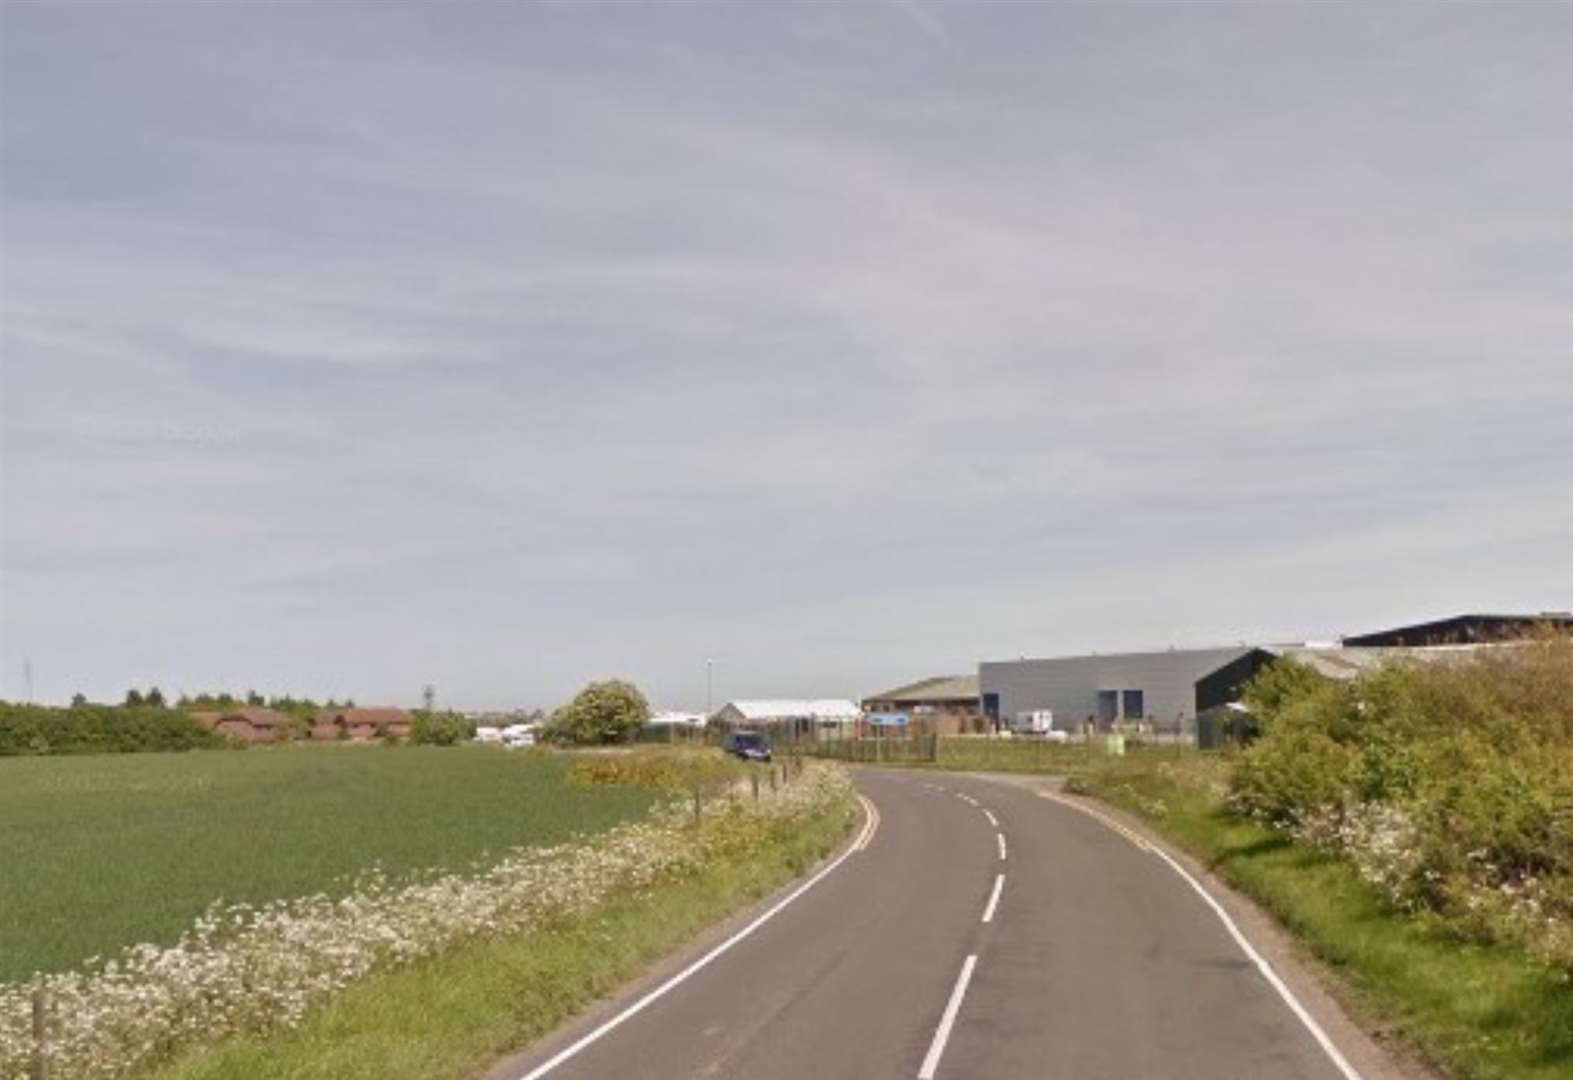 The crash happened in Spitfire Way, Manston. Picture: Google